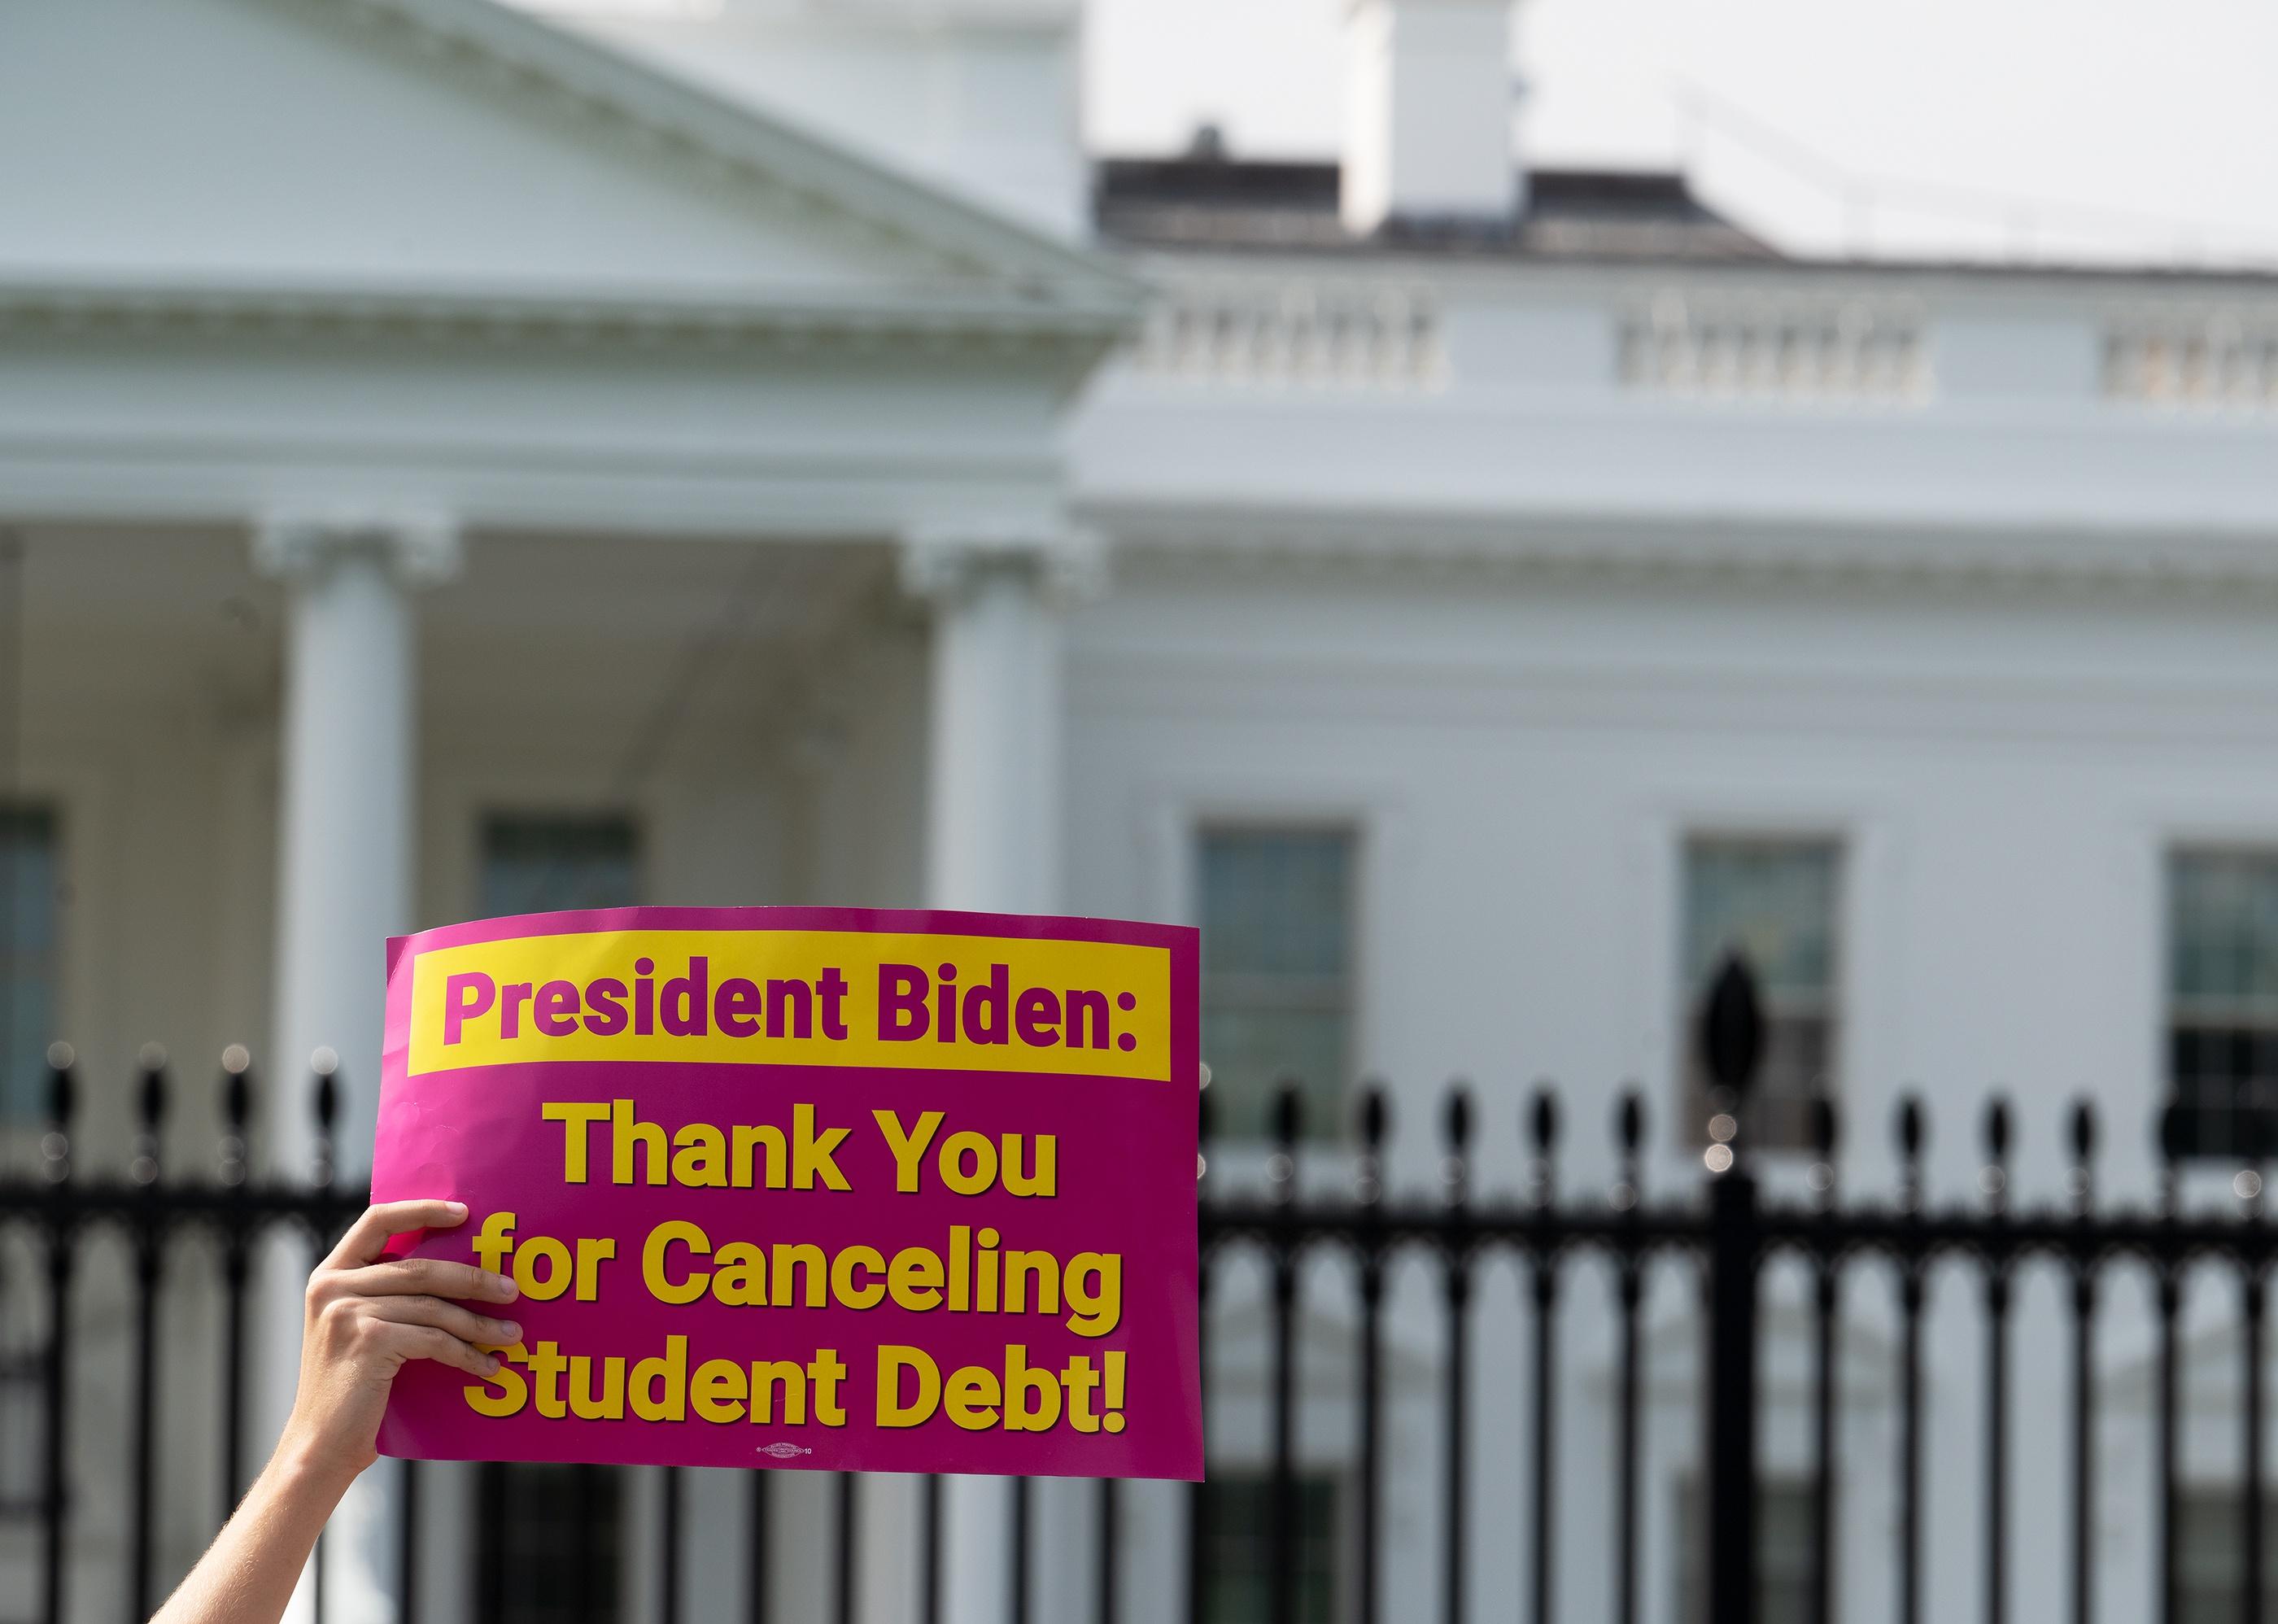 A person holds up a pink sign thanking President Biden for canceling student debt.